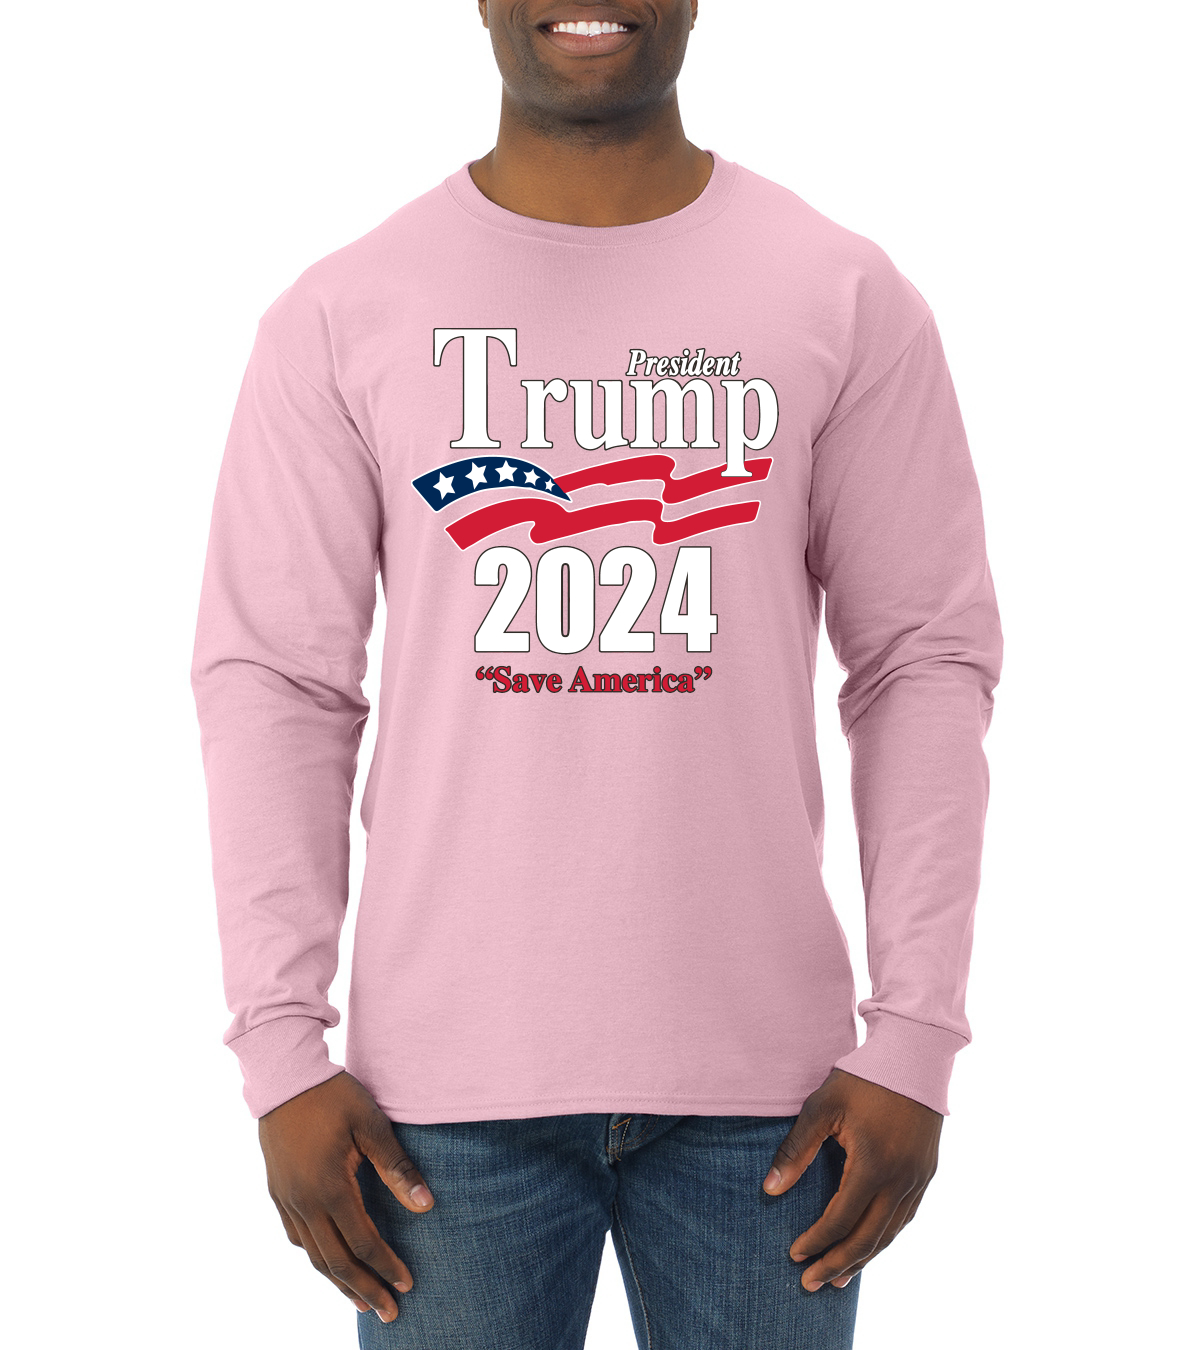 Trump 2024 Shirts For Sale On Ebay - Nicky Anabella